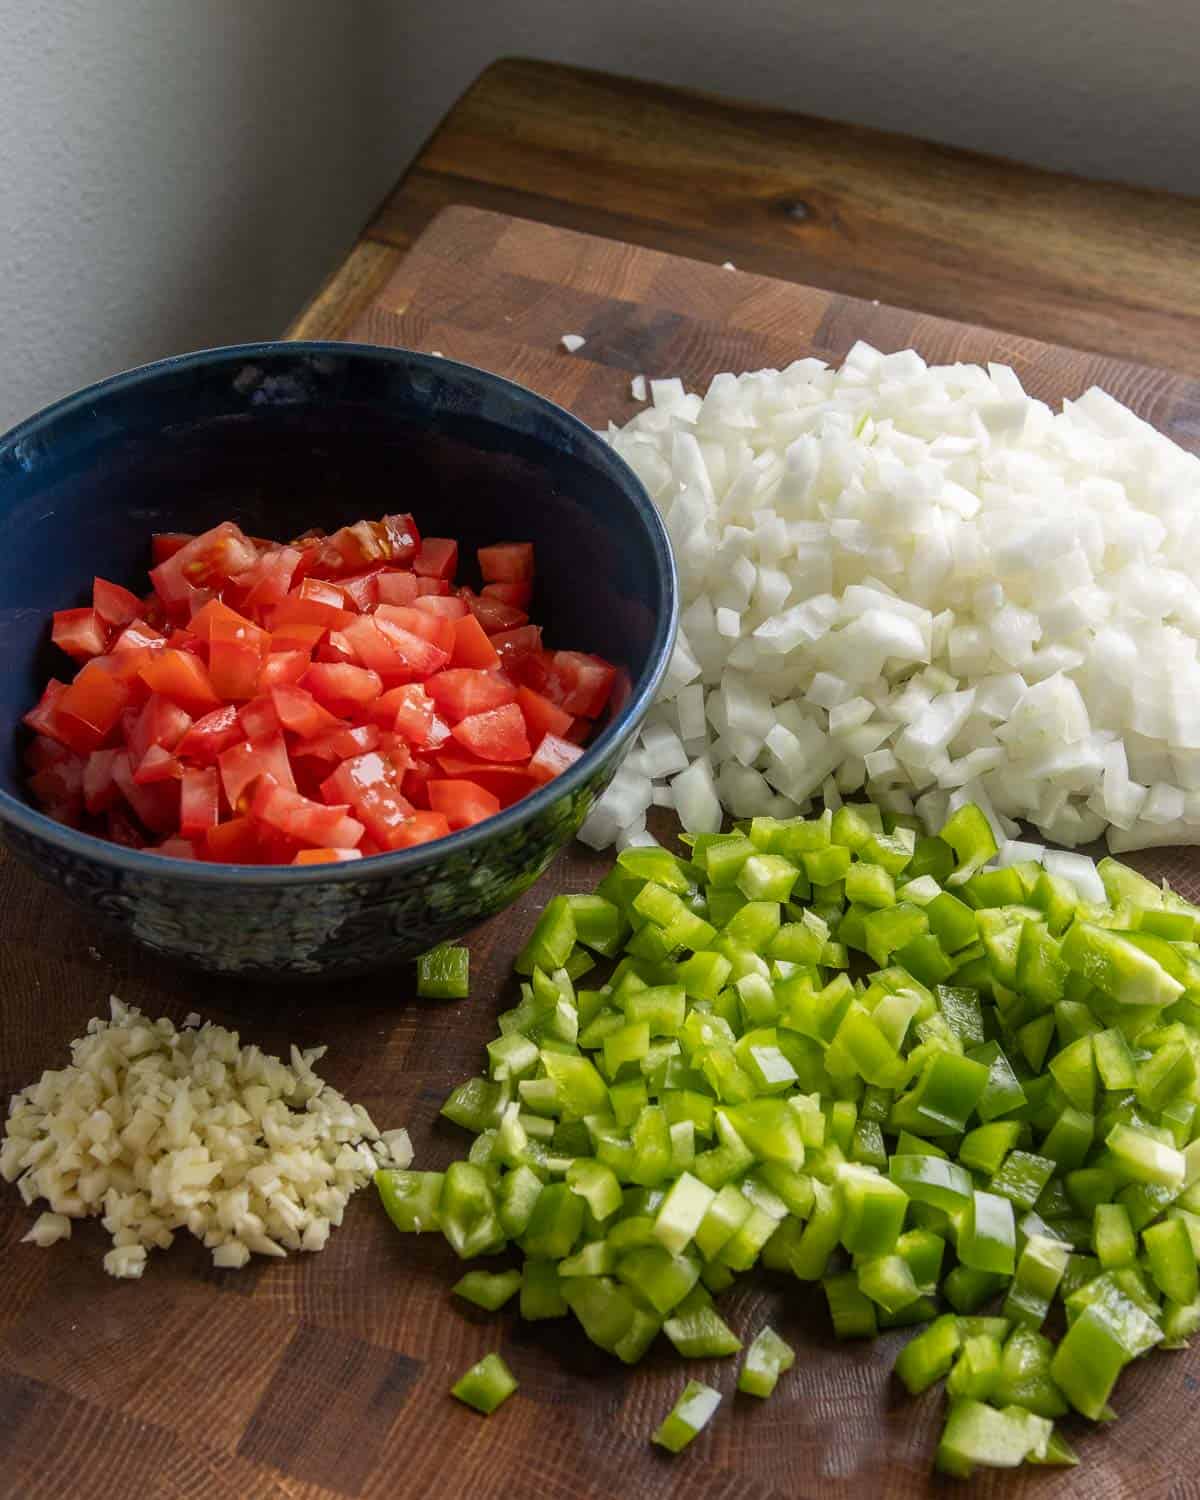 A cutting board with diced ingredients for homemade sofritas, including tomato, onion, pepper and garlic.